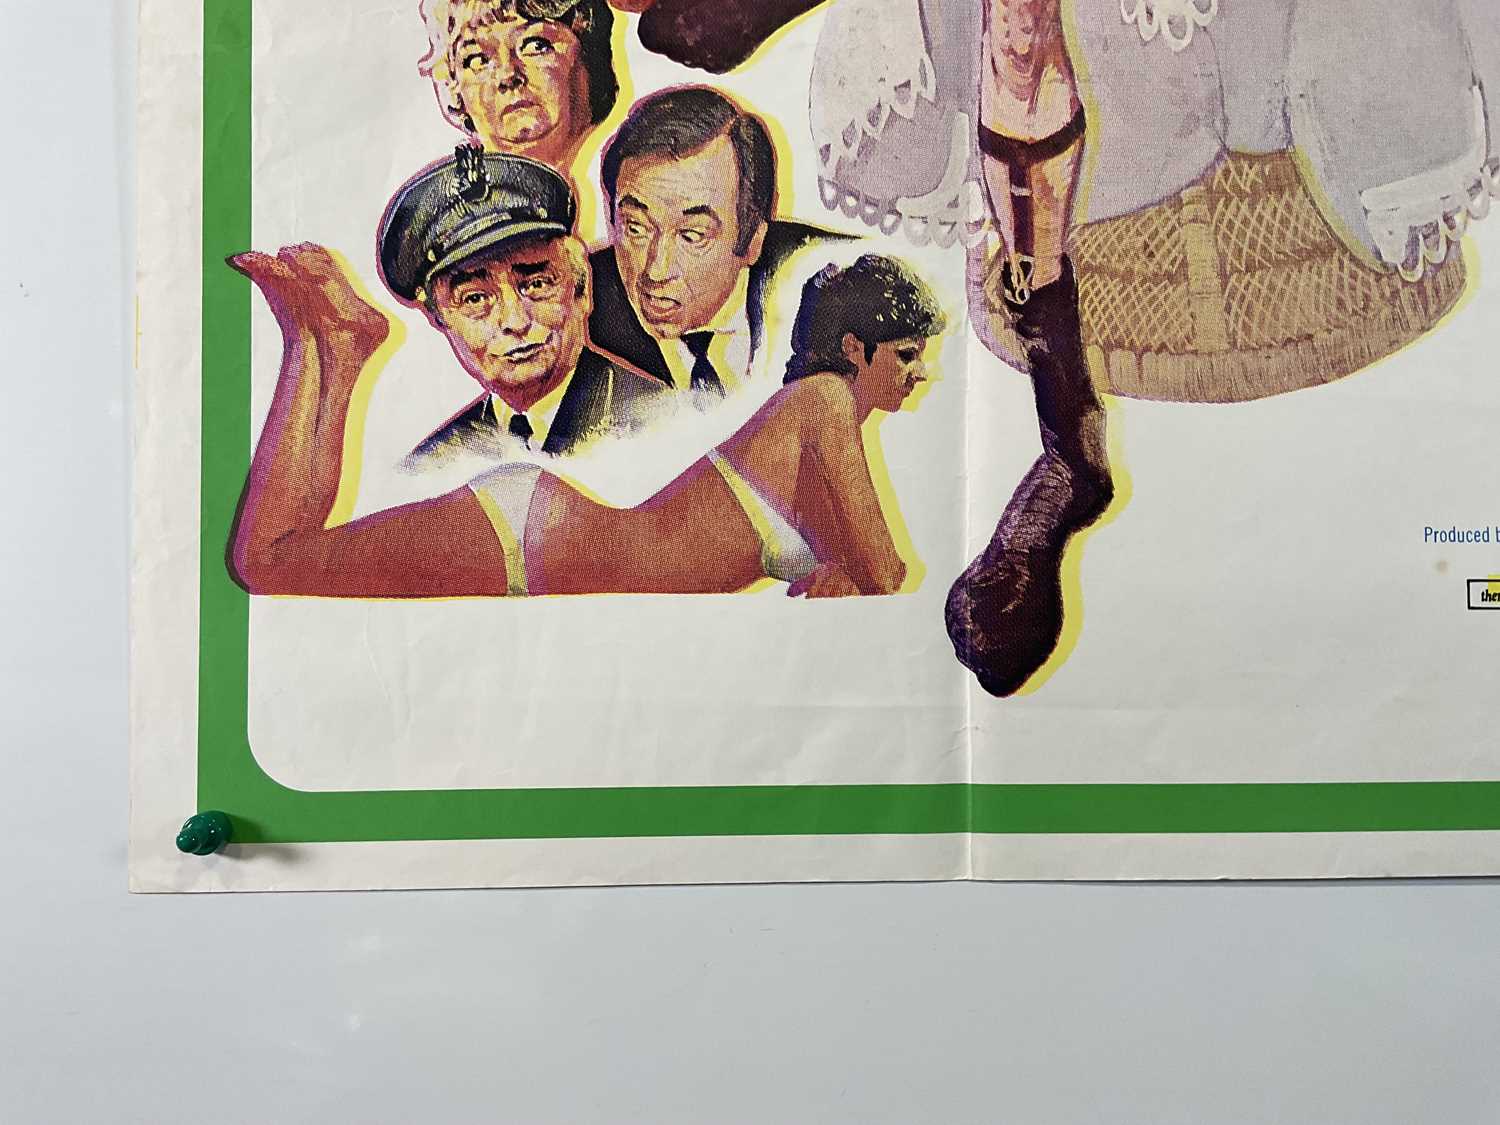 CARRY ON EMMANNUELLE / SPEED TRAP (1978) Double-Bill UK Quad film poster, folded - Image 4 of 5